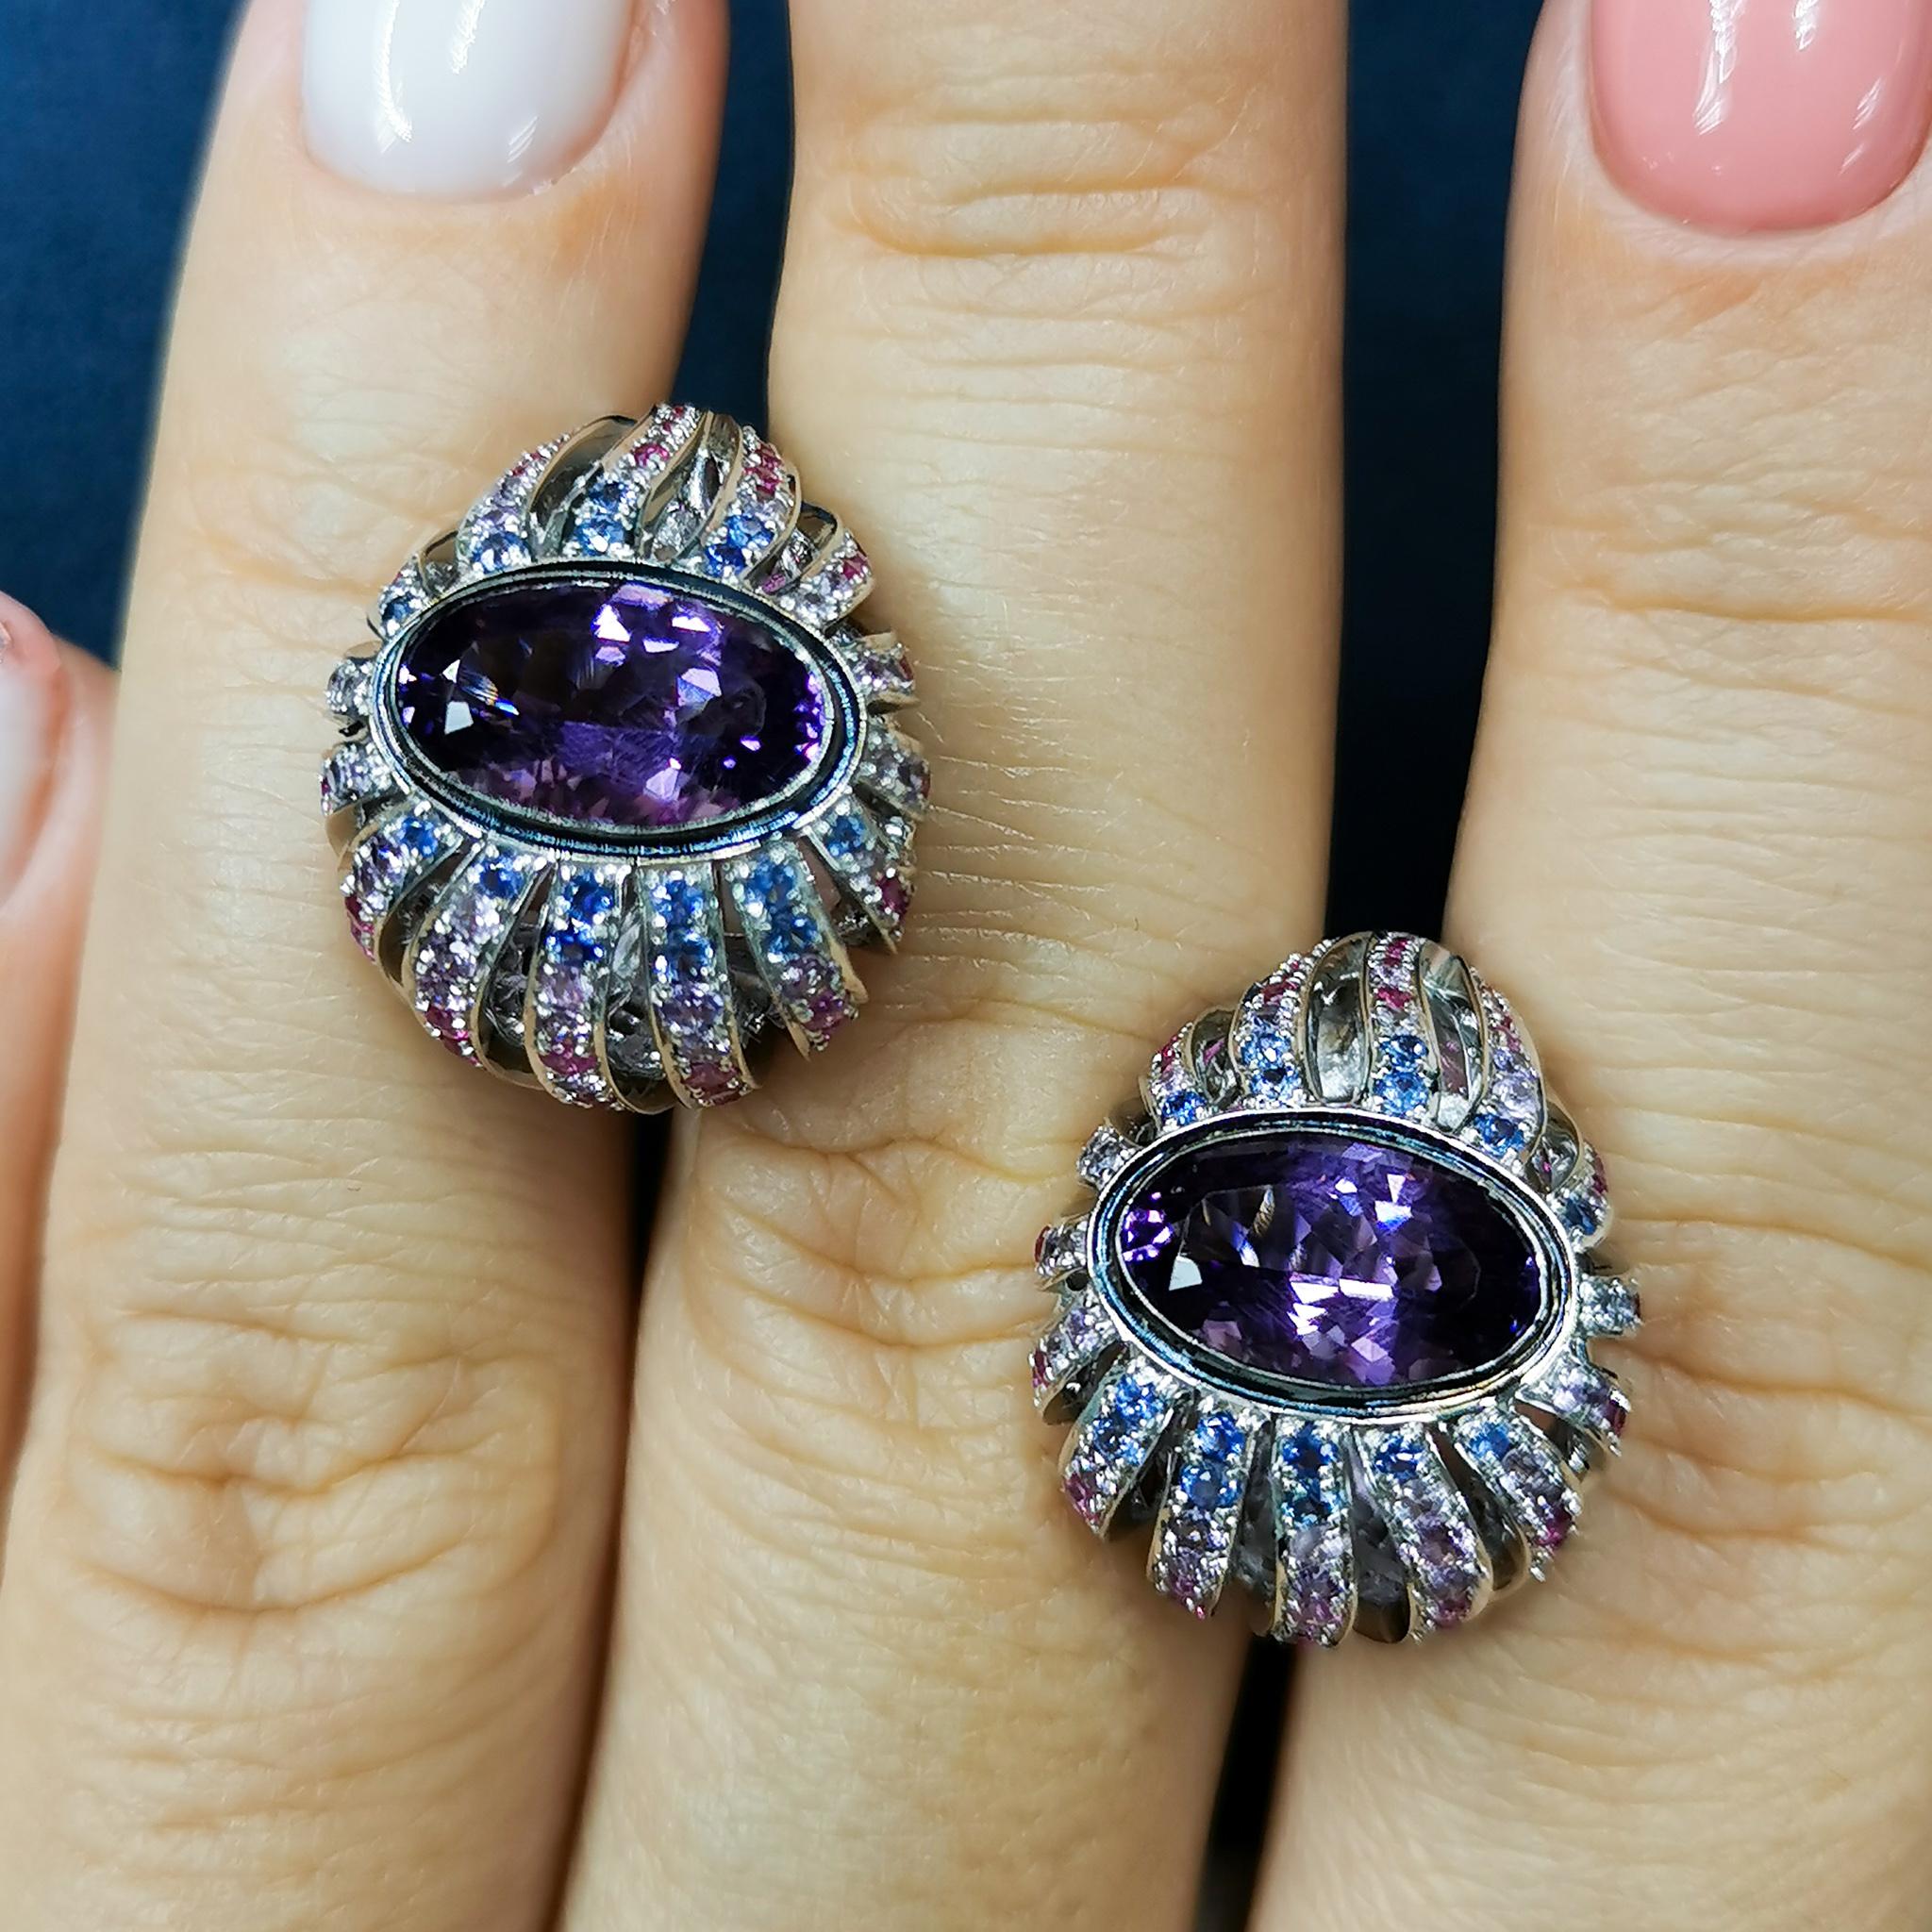 Oval Cut Amethyst 4.07 Carat Rubies Sapphires 18 Karat White Gold New Age Earrings For Sale